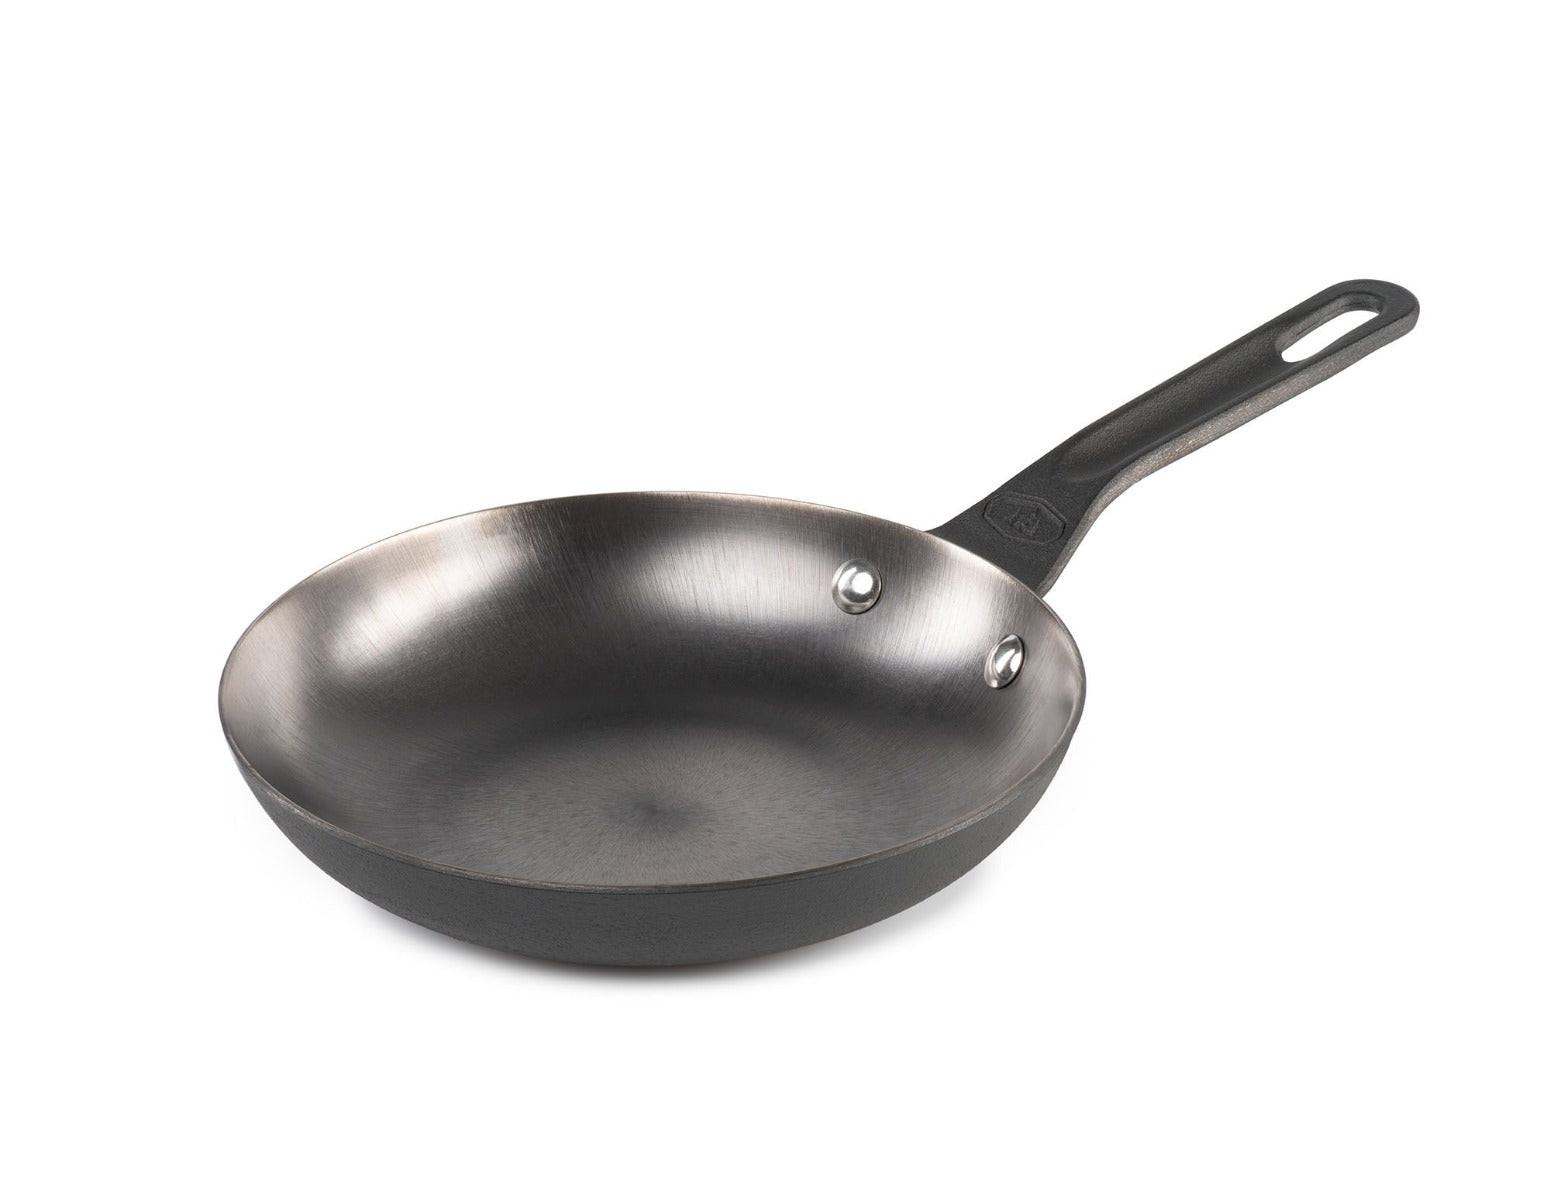 All-Clad 10 Inch Skillet Stainless Steel Sauté Fry Pan USA.